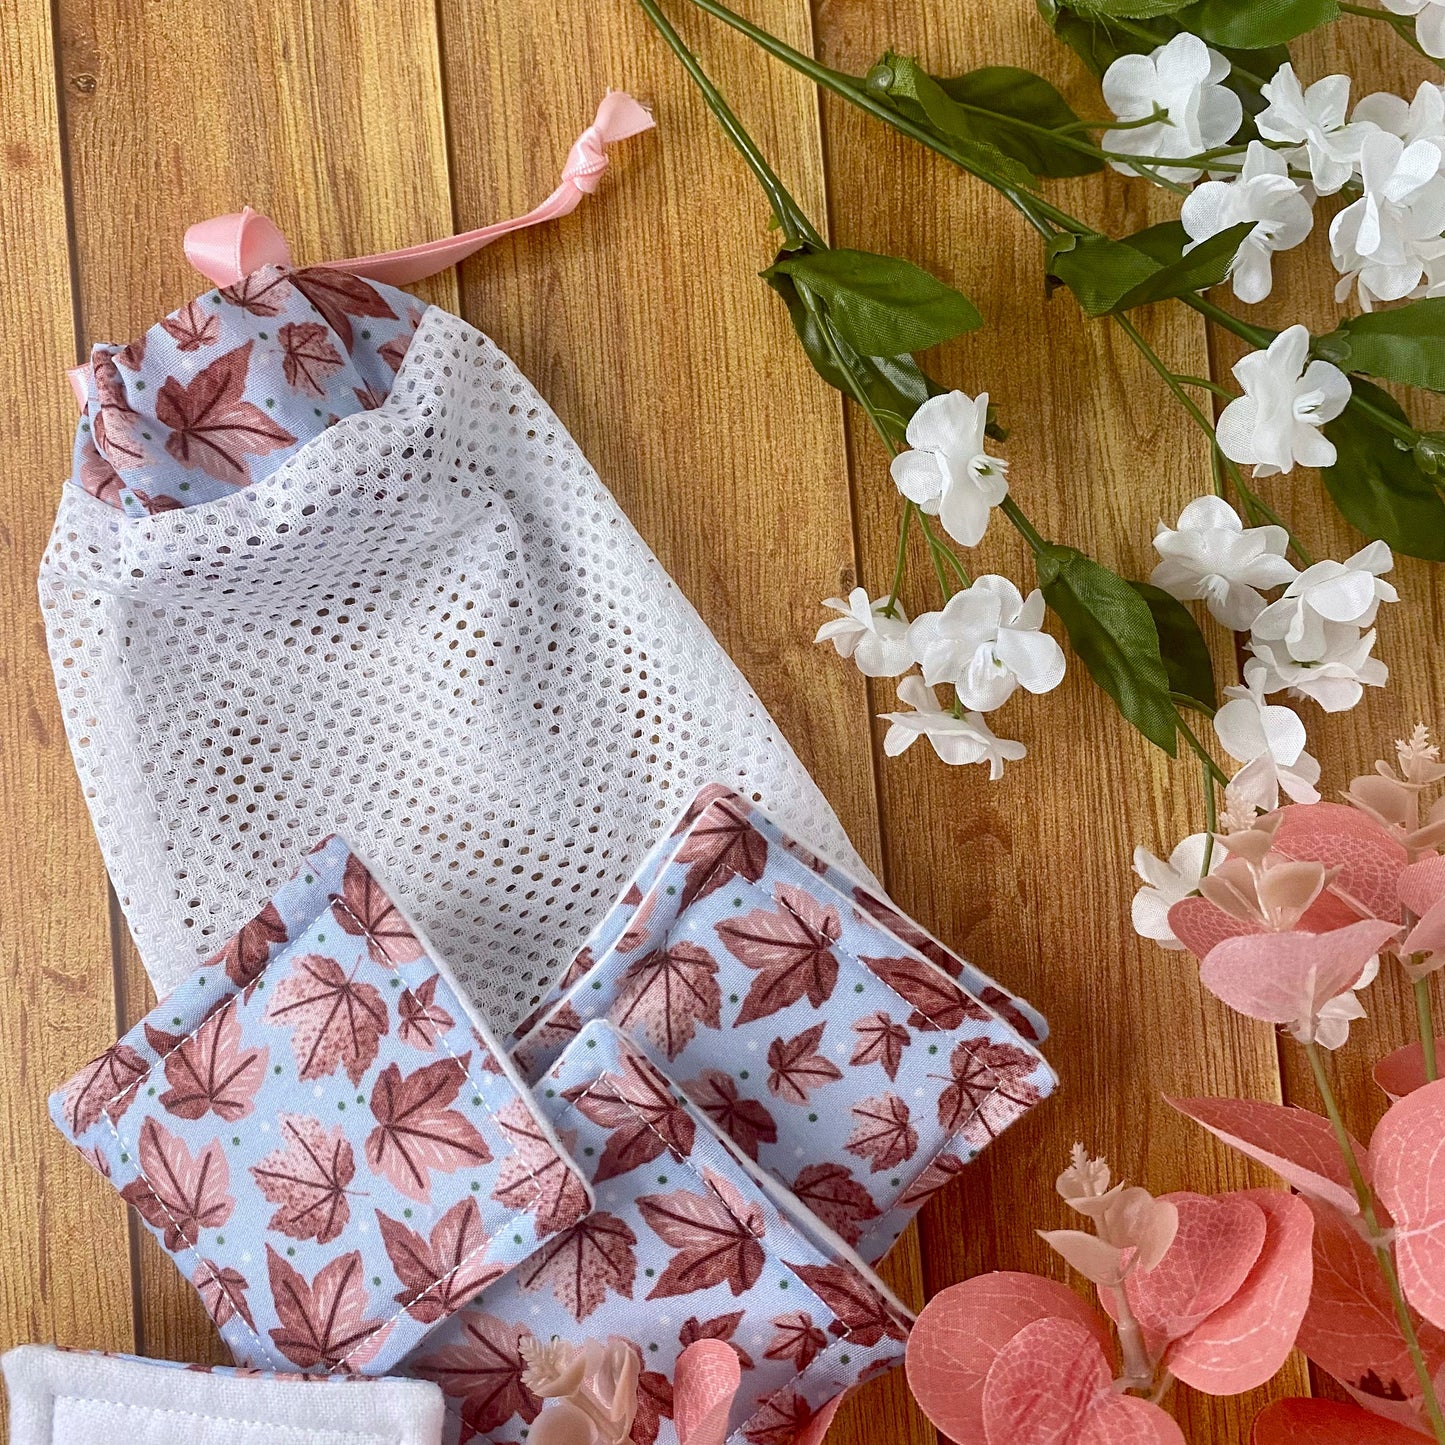 pink leafy patterned reusable skincare pads and washbag giftset on wooden backdrop